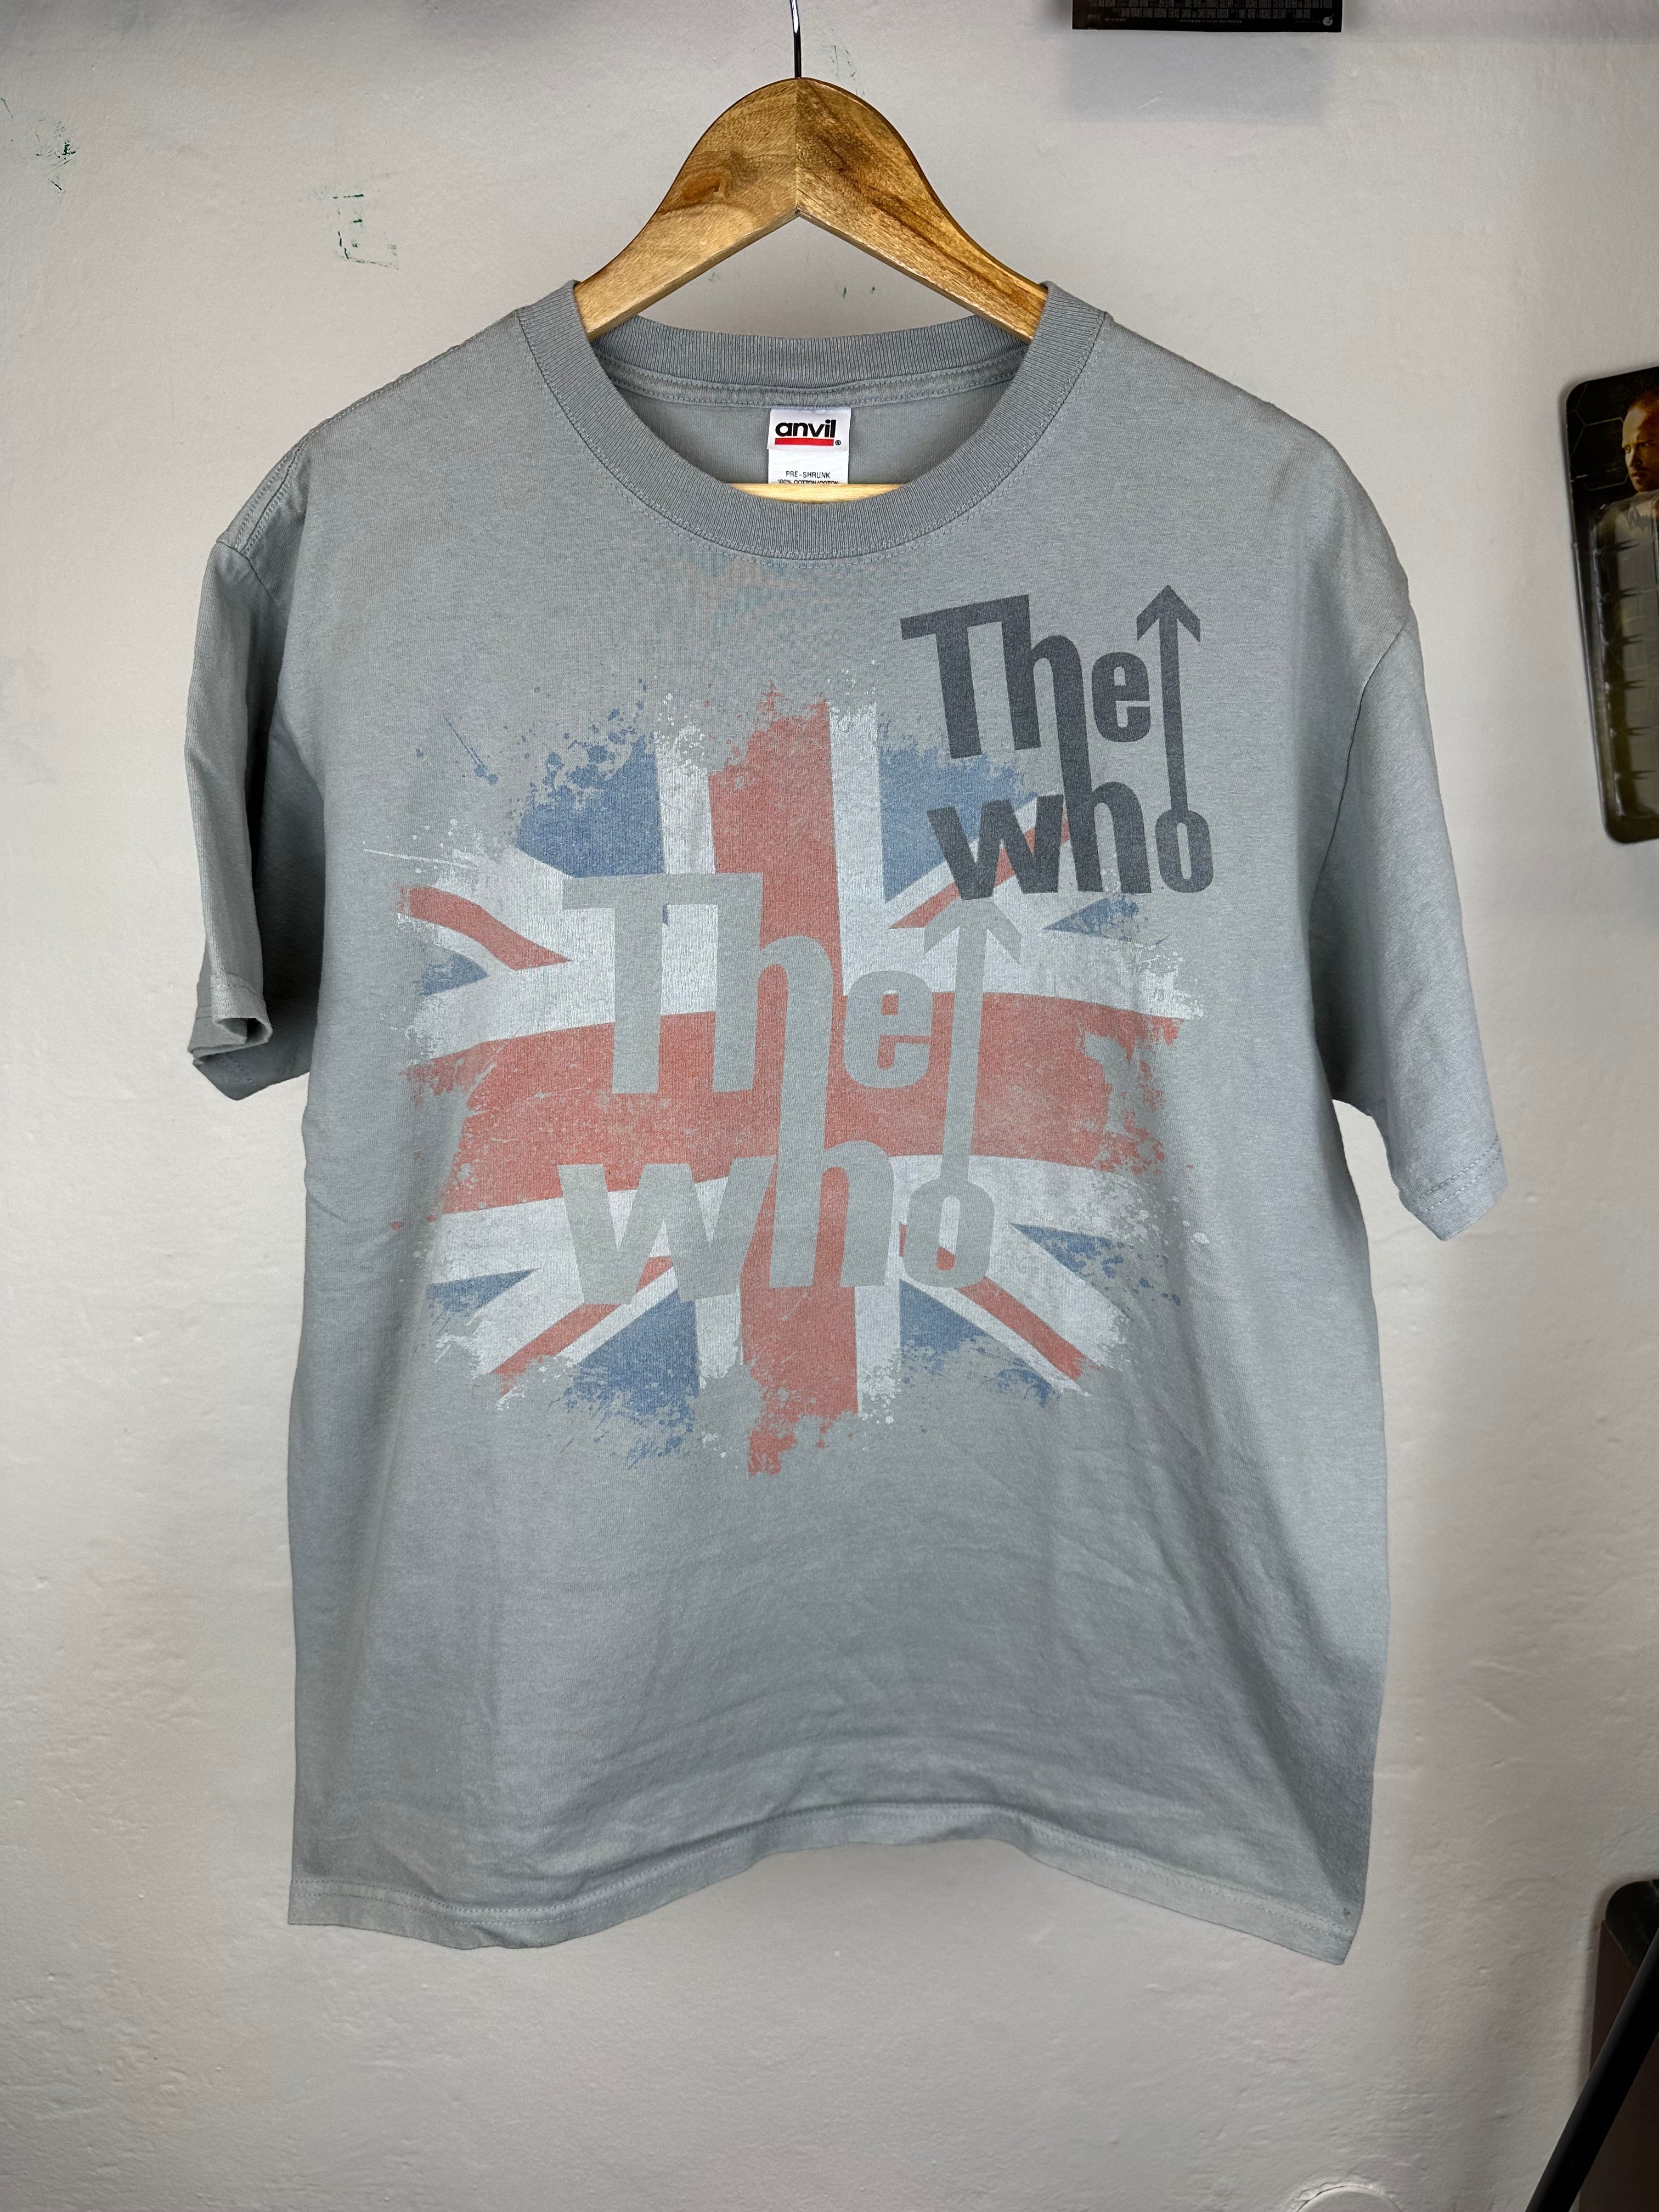 Vintage The Who t-shirt - size L